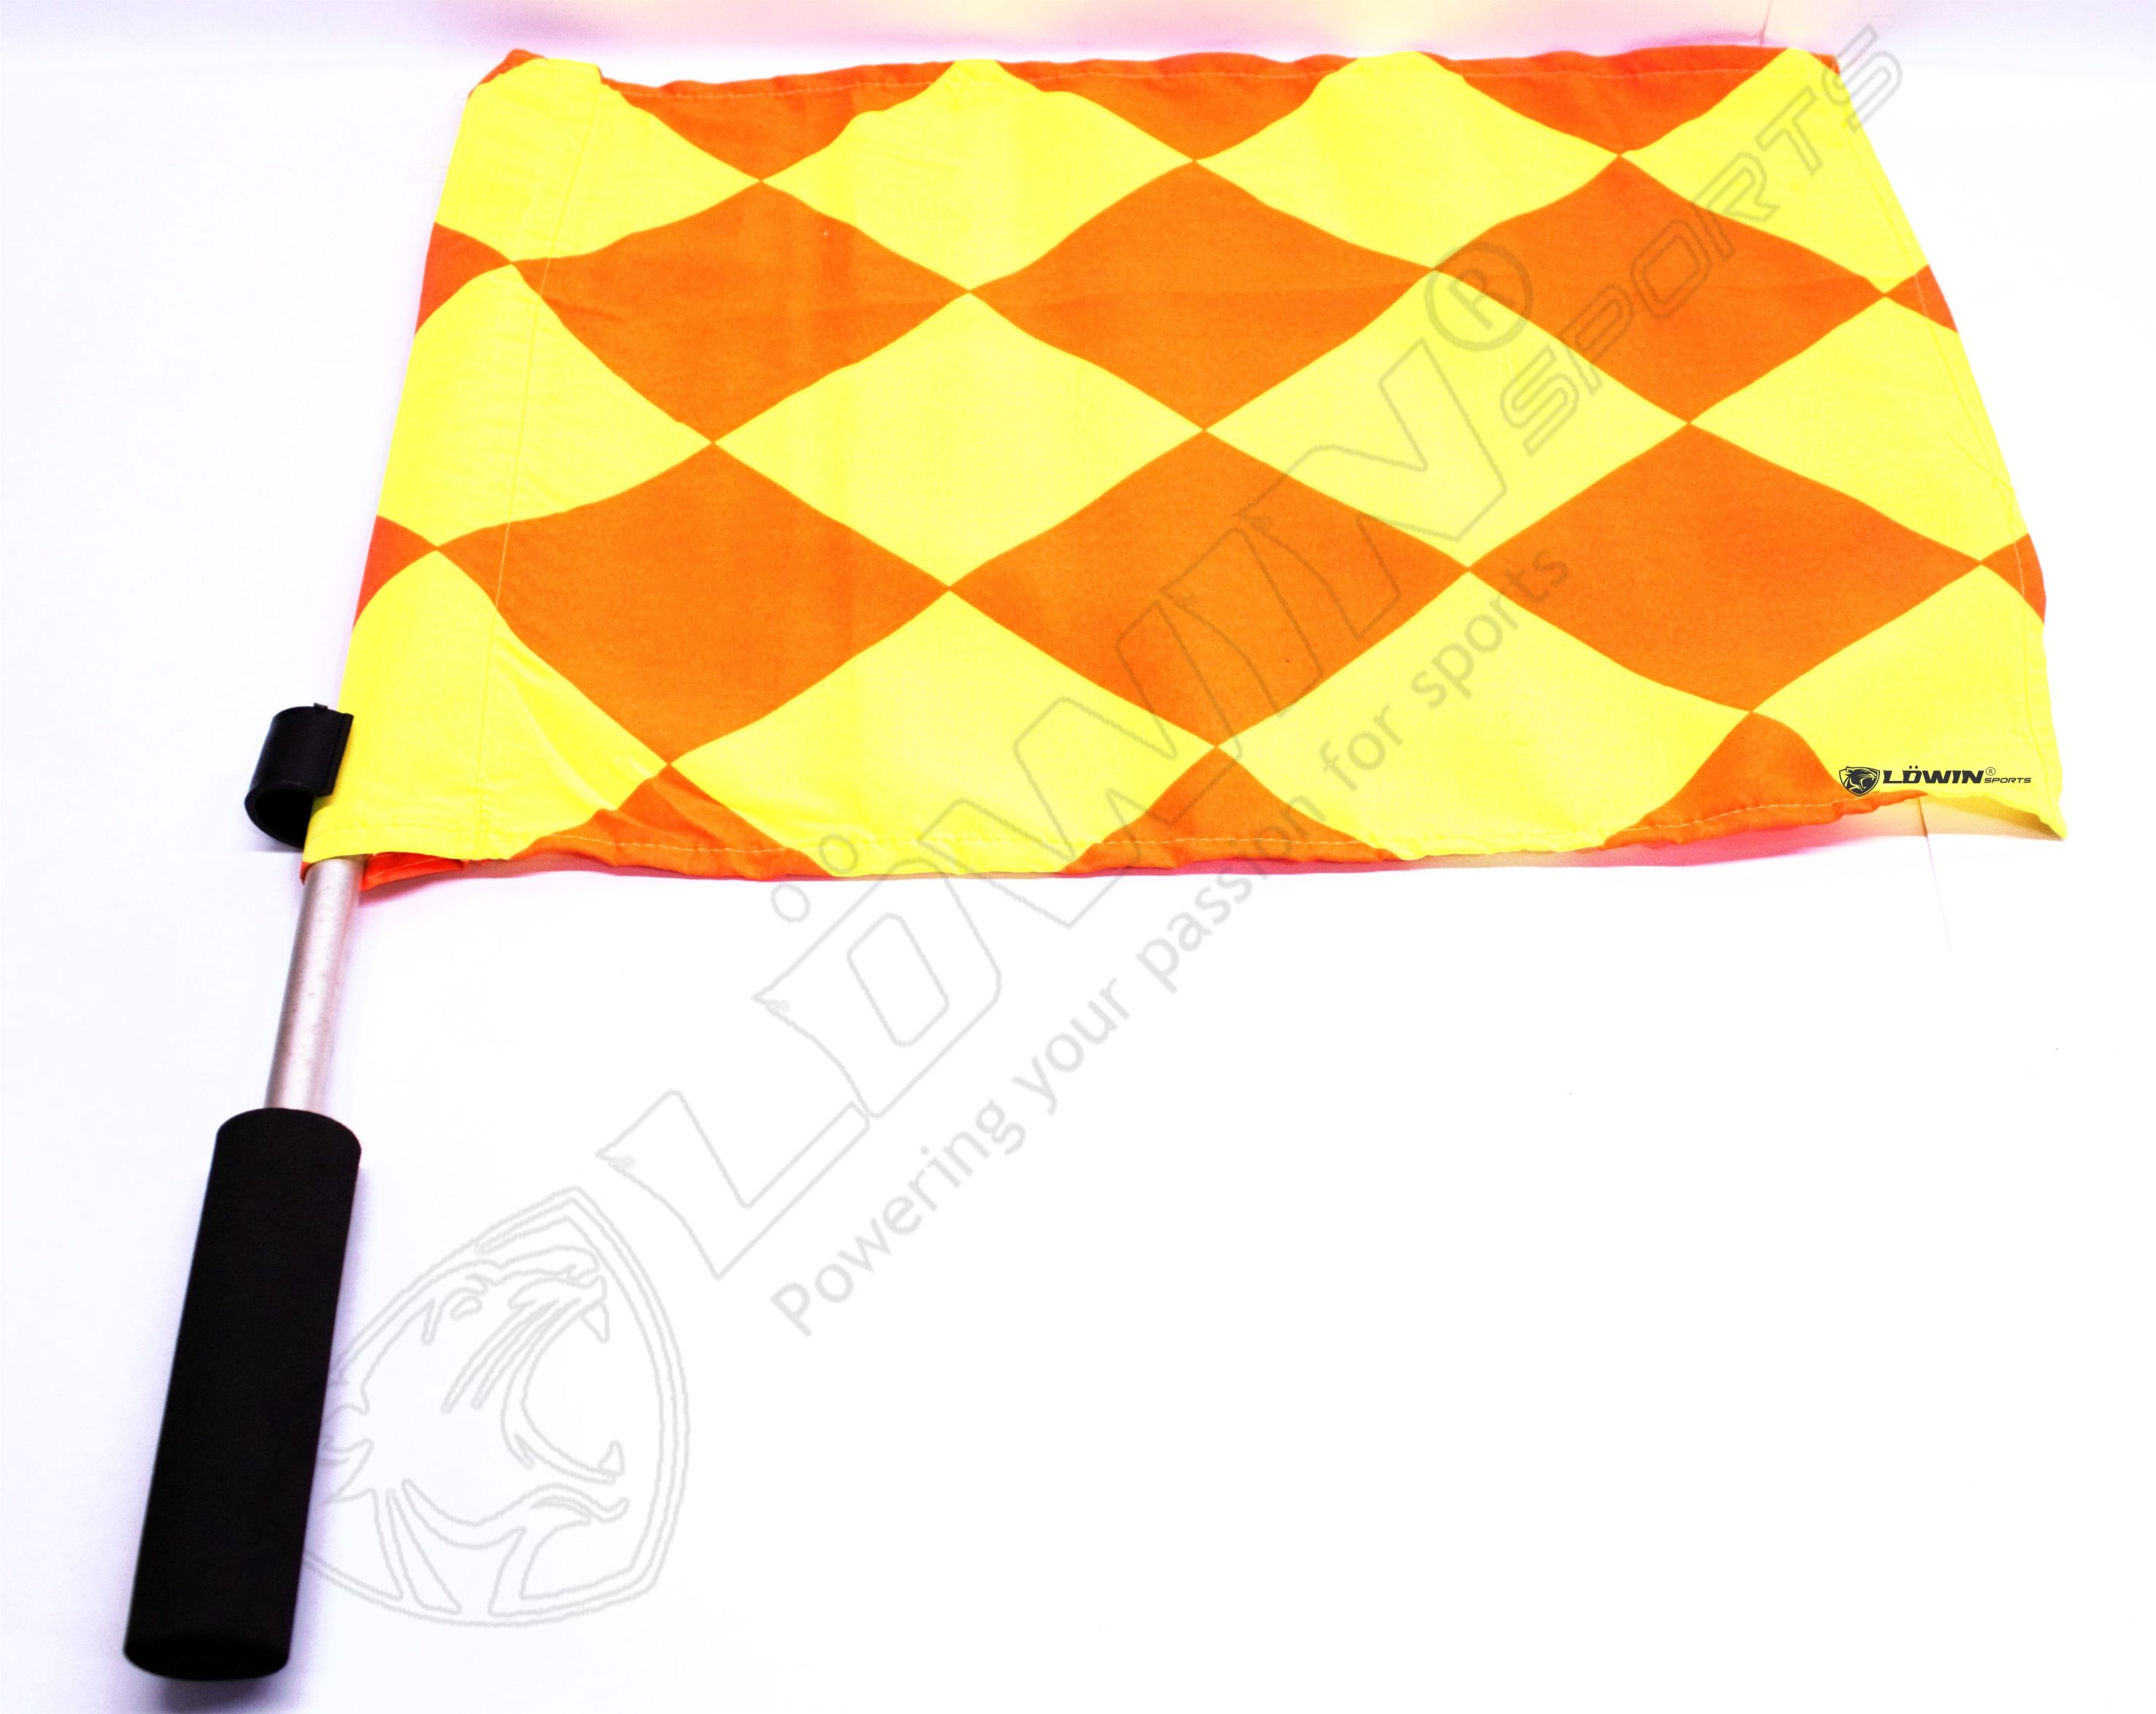 LINESMAN FLAG OFFICIAL WORLD CUP MODEL'